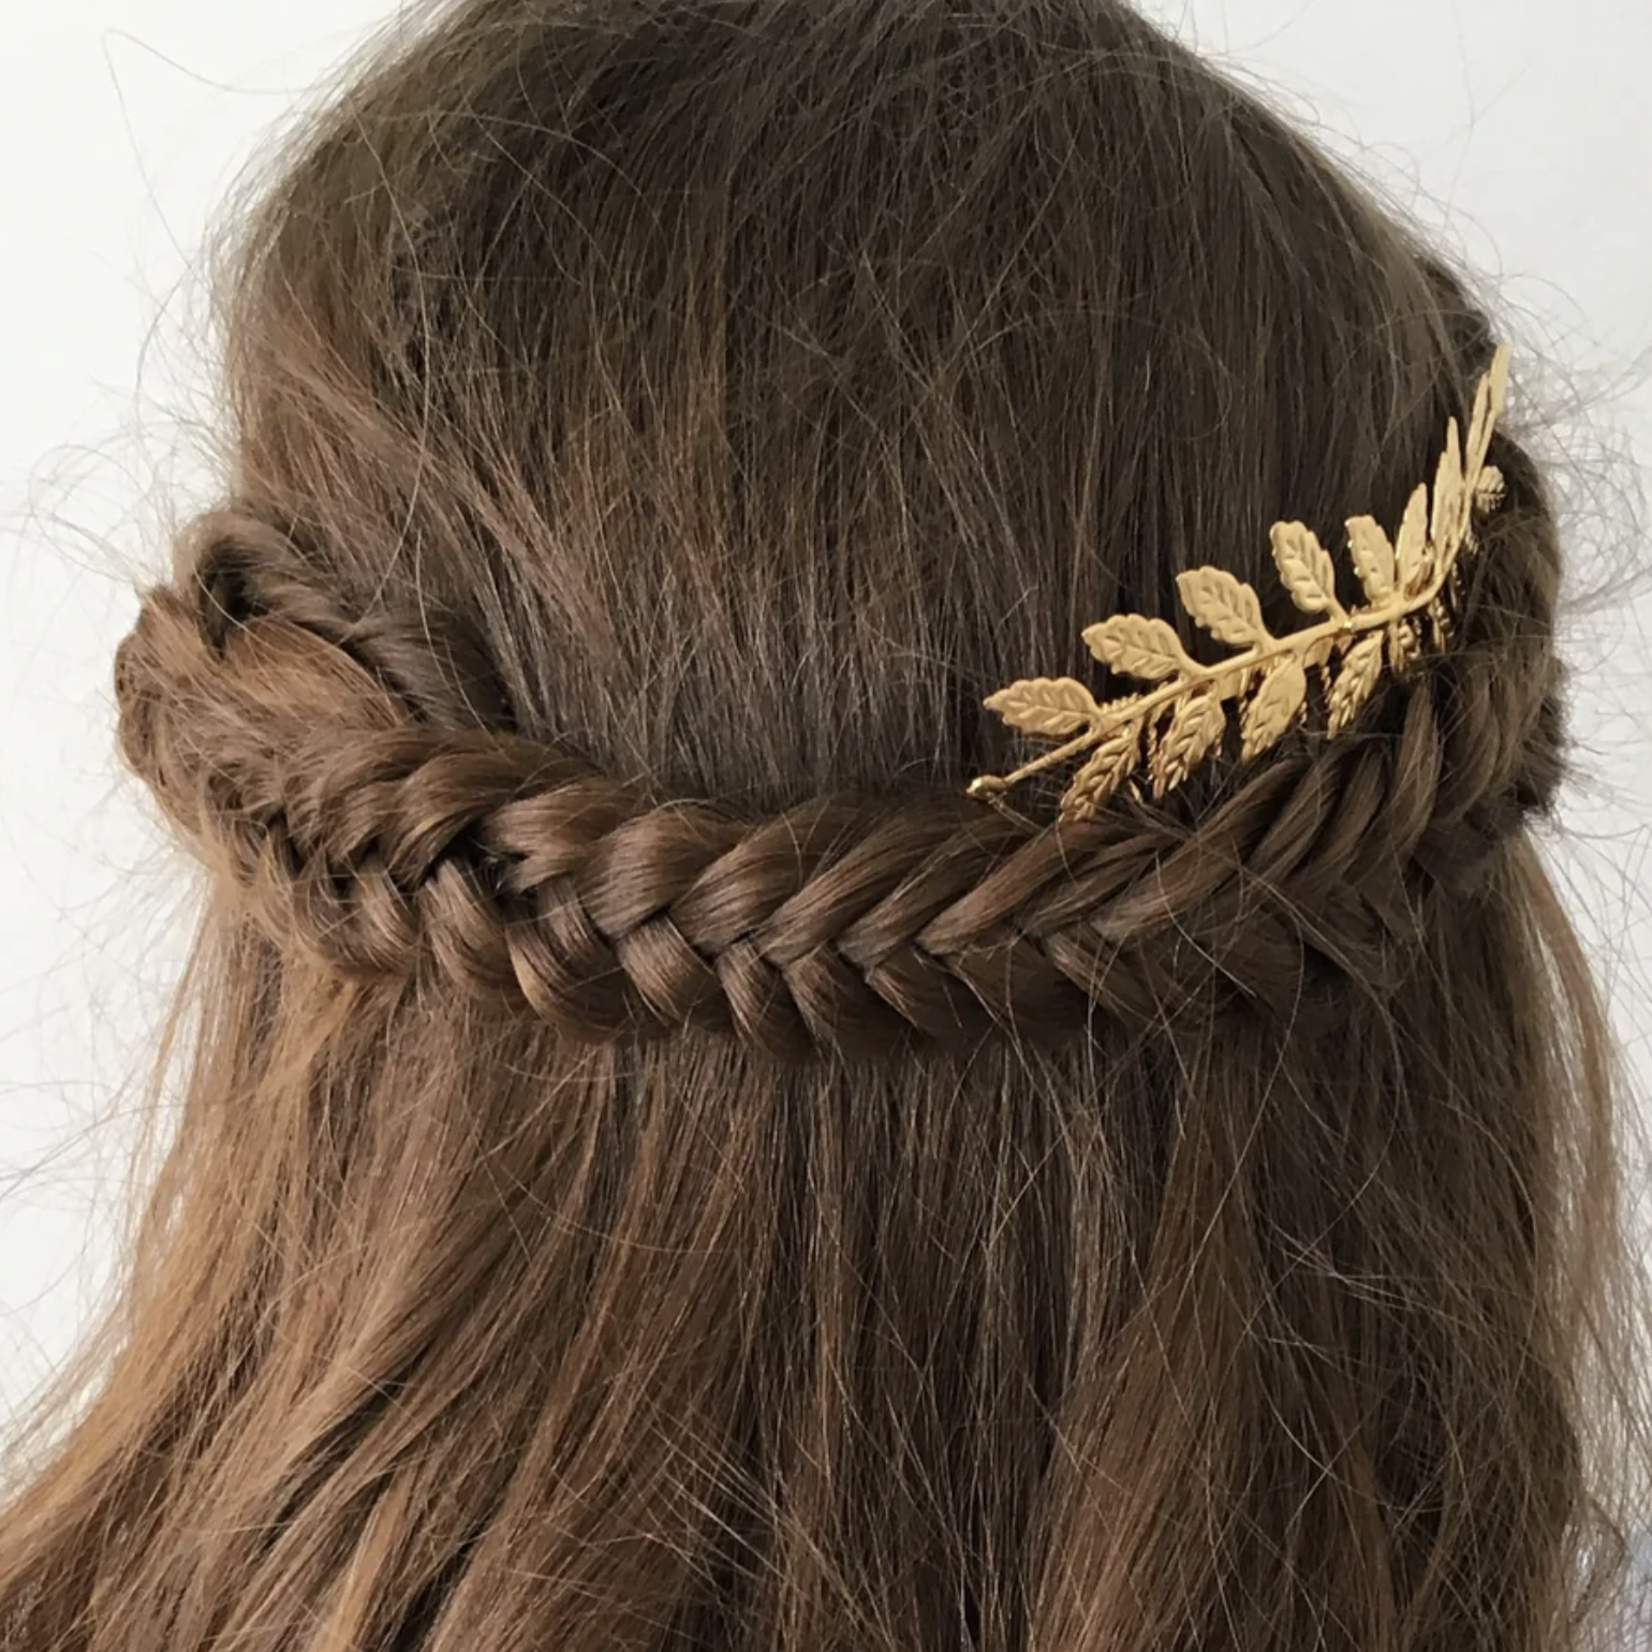 *Double Fairy Comb · Gold